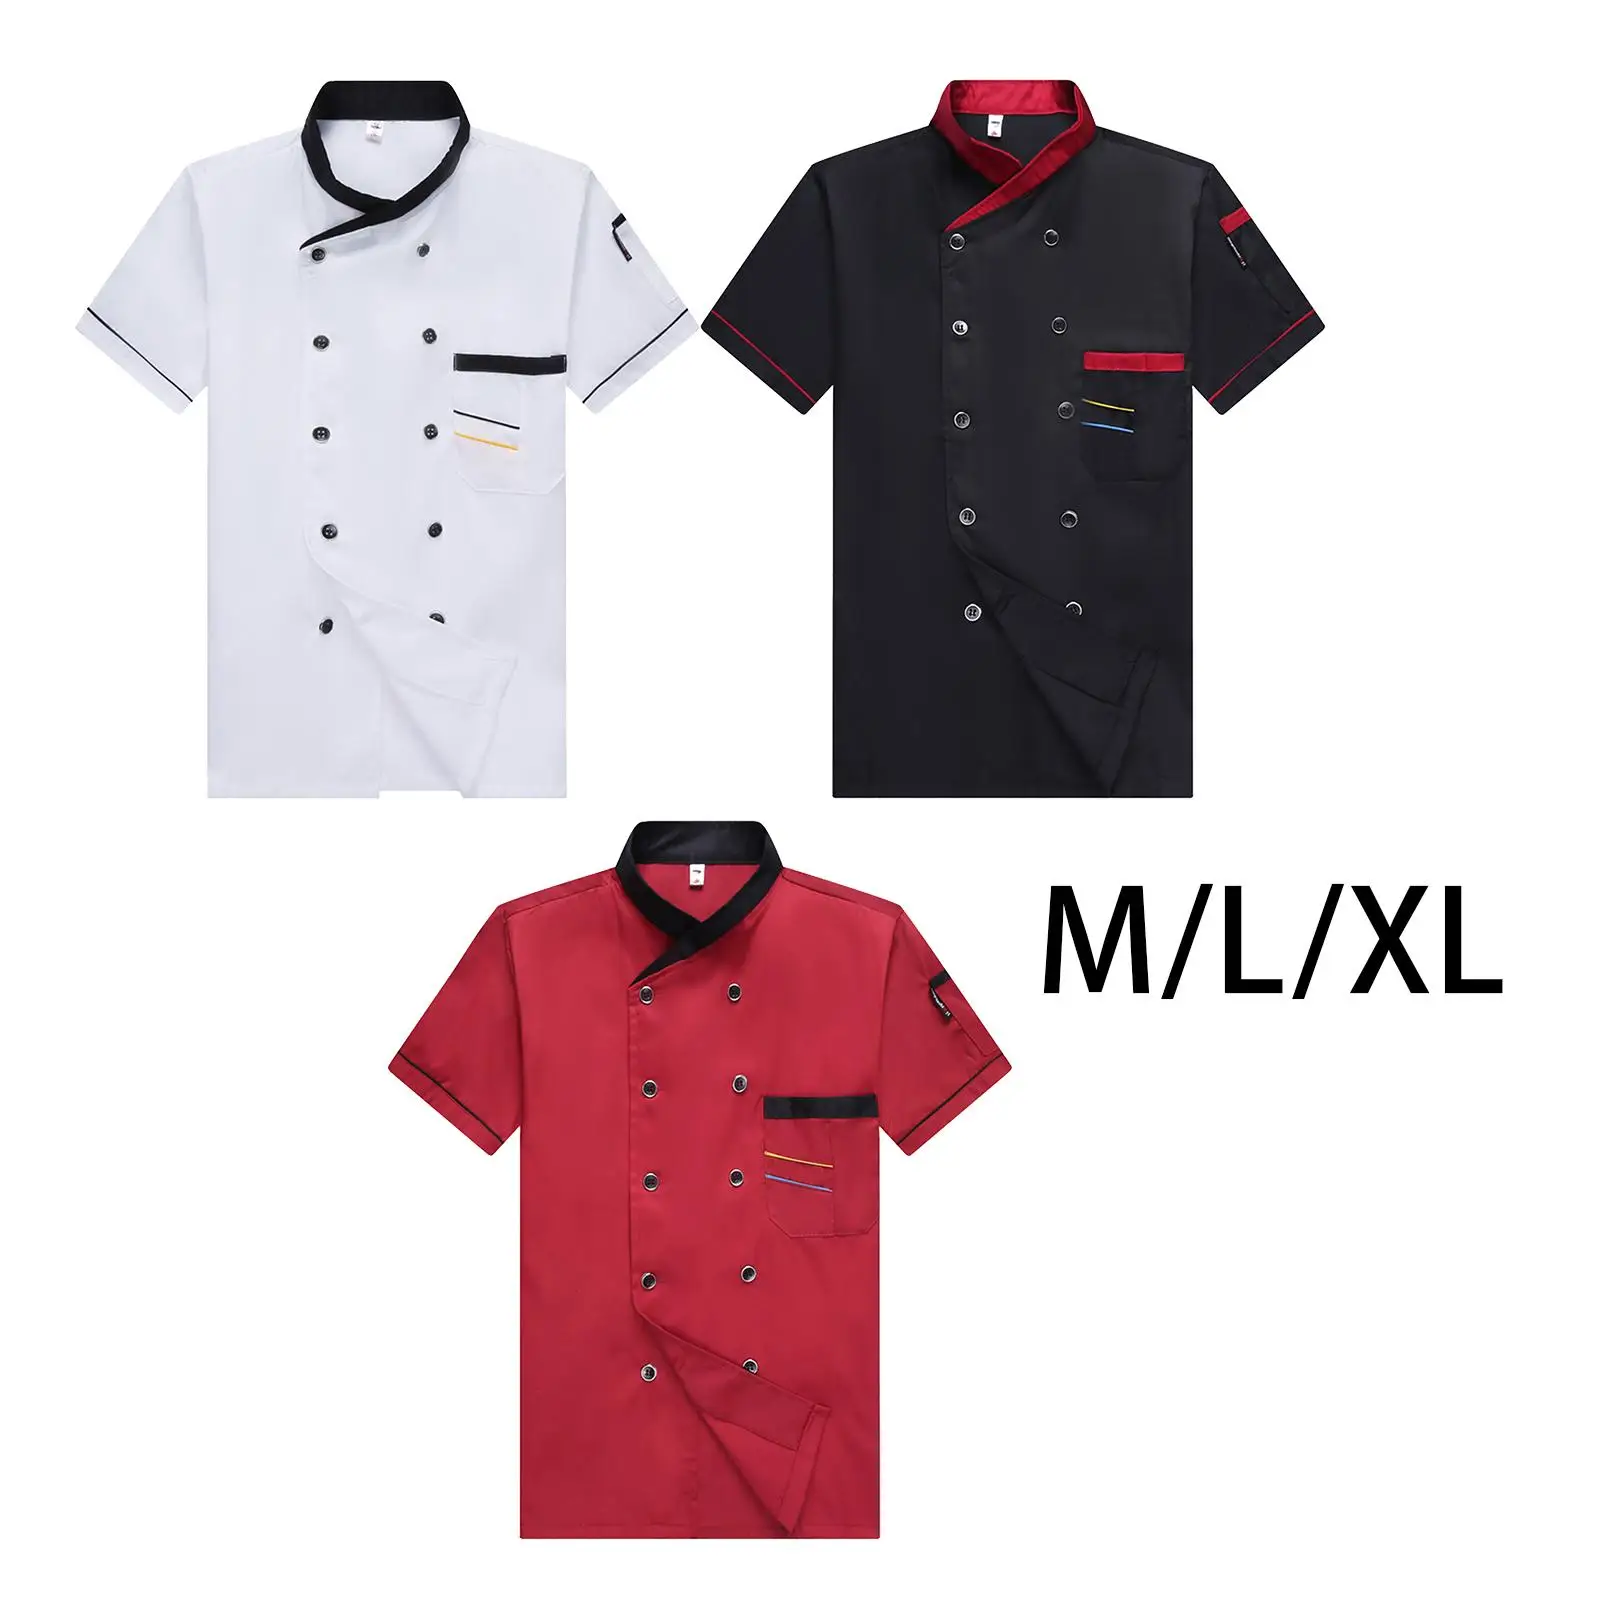 Unisex Chef Uniform Jacket Short Sleeve Shirt Breathable Comfortable Men Women Coat Chef Clothes Workwear for Cooking Cafe Hotel